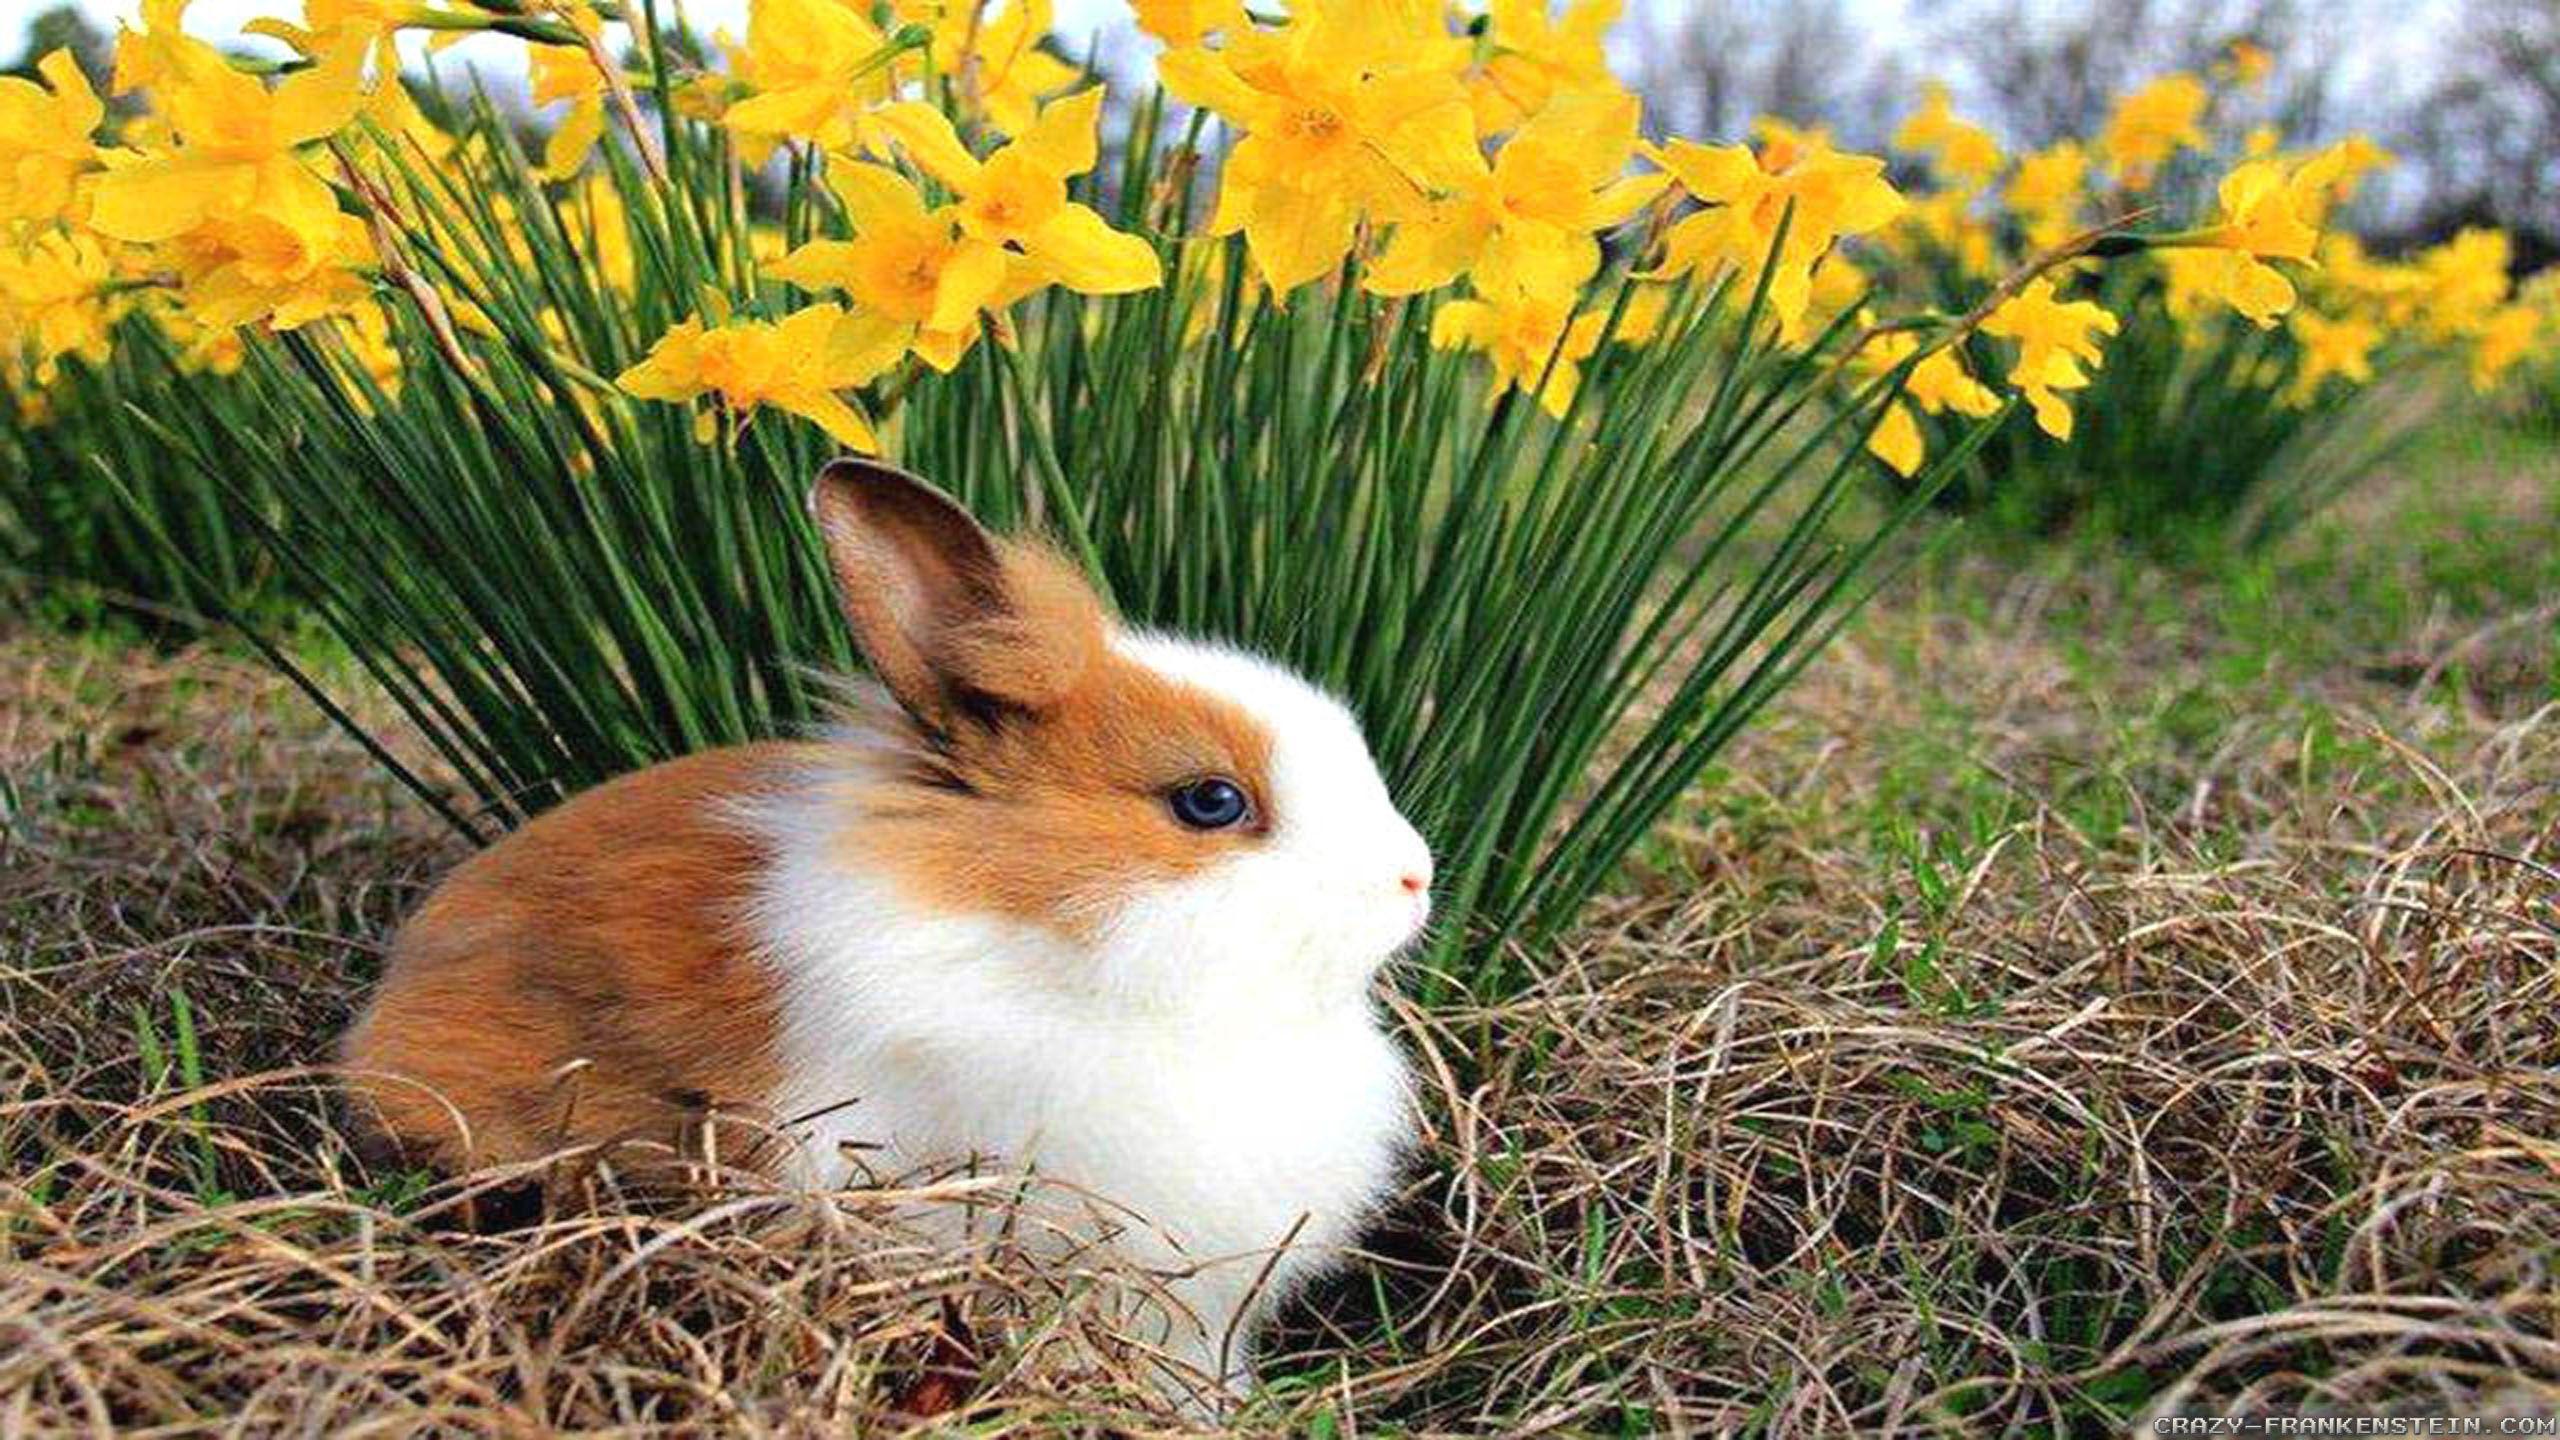 Cute Spring AnimalsWallpapers